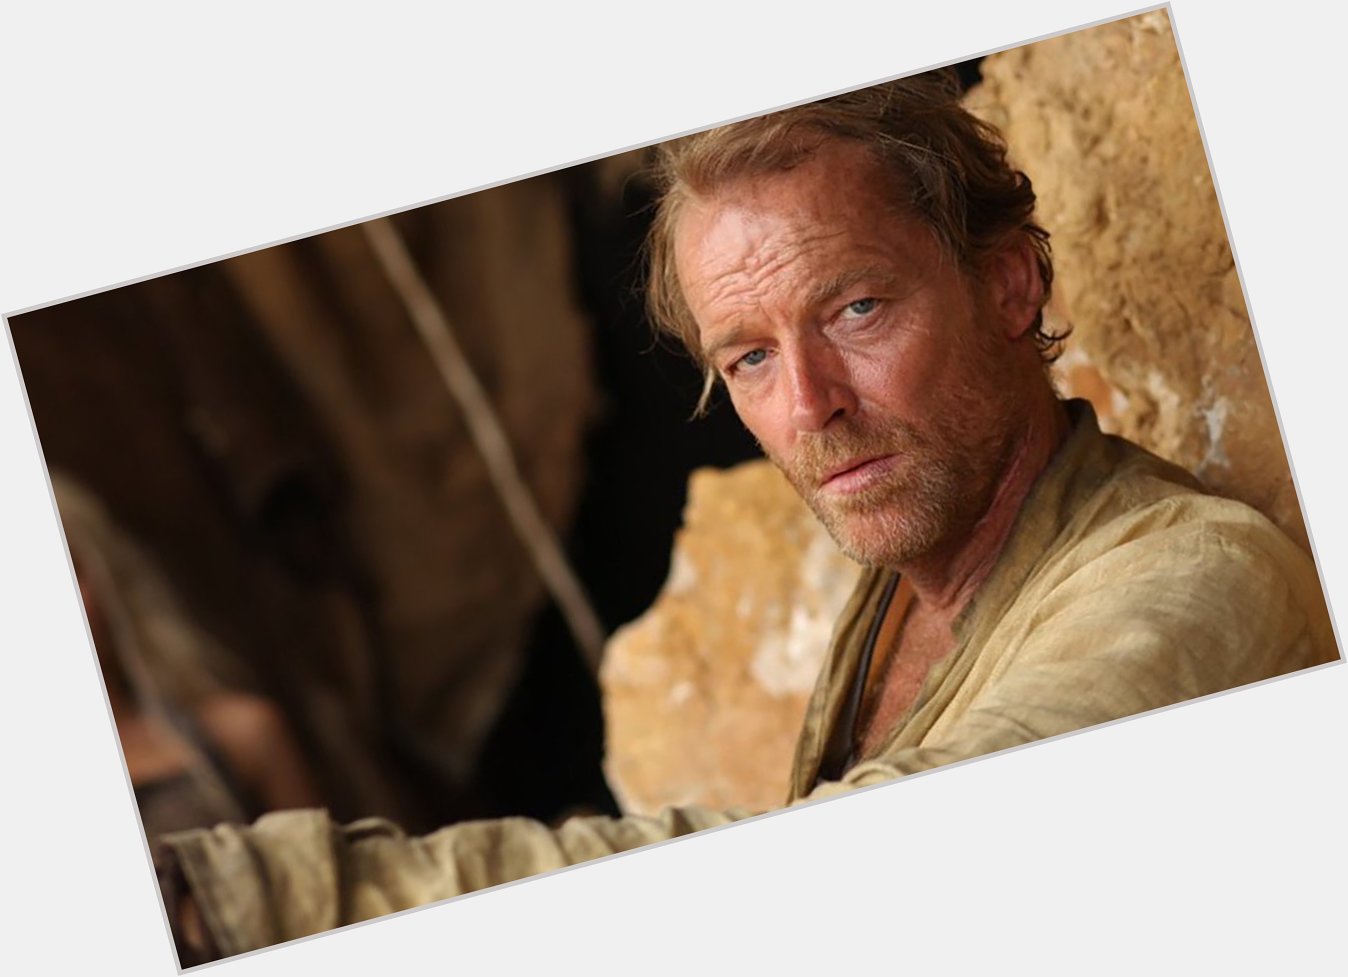 Tomb Raider, Resident Evil, Kick-Ass, Game of Thrones, and so much more - a happy 56th birthday to Iain Glen. 